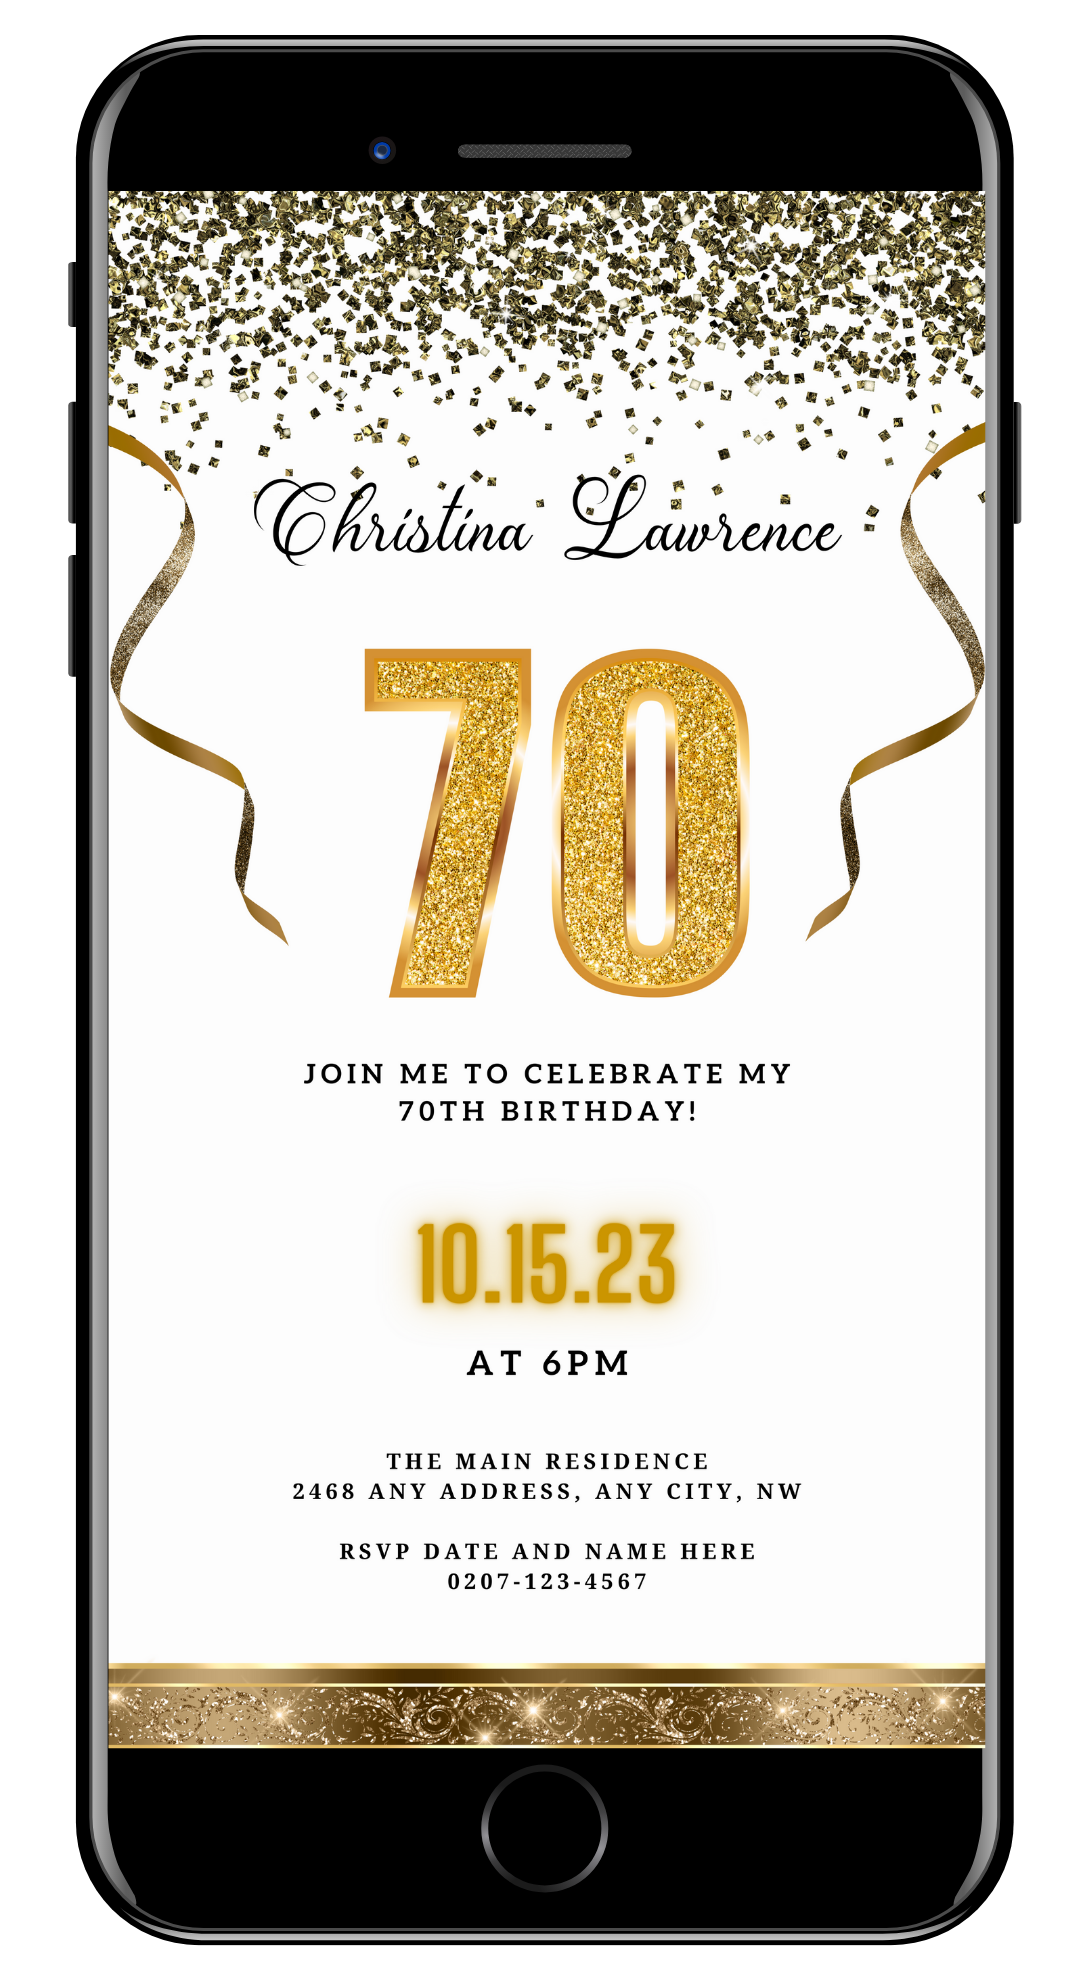 Customizable White Gold Confetti | 70th Birthday Evite displayed on a smartphone screen with gold text and ribbons, ideal for digital invitations.